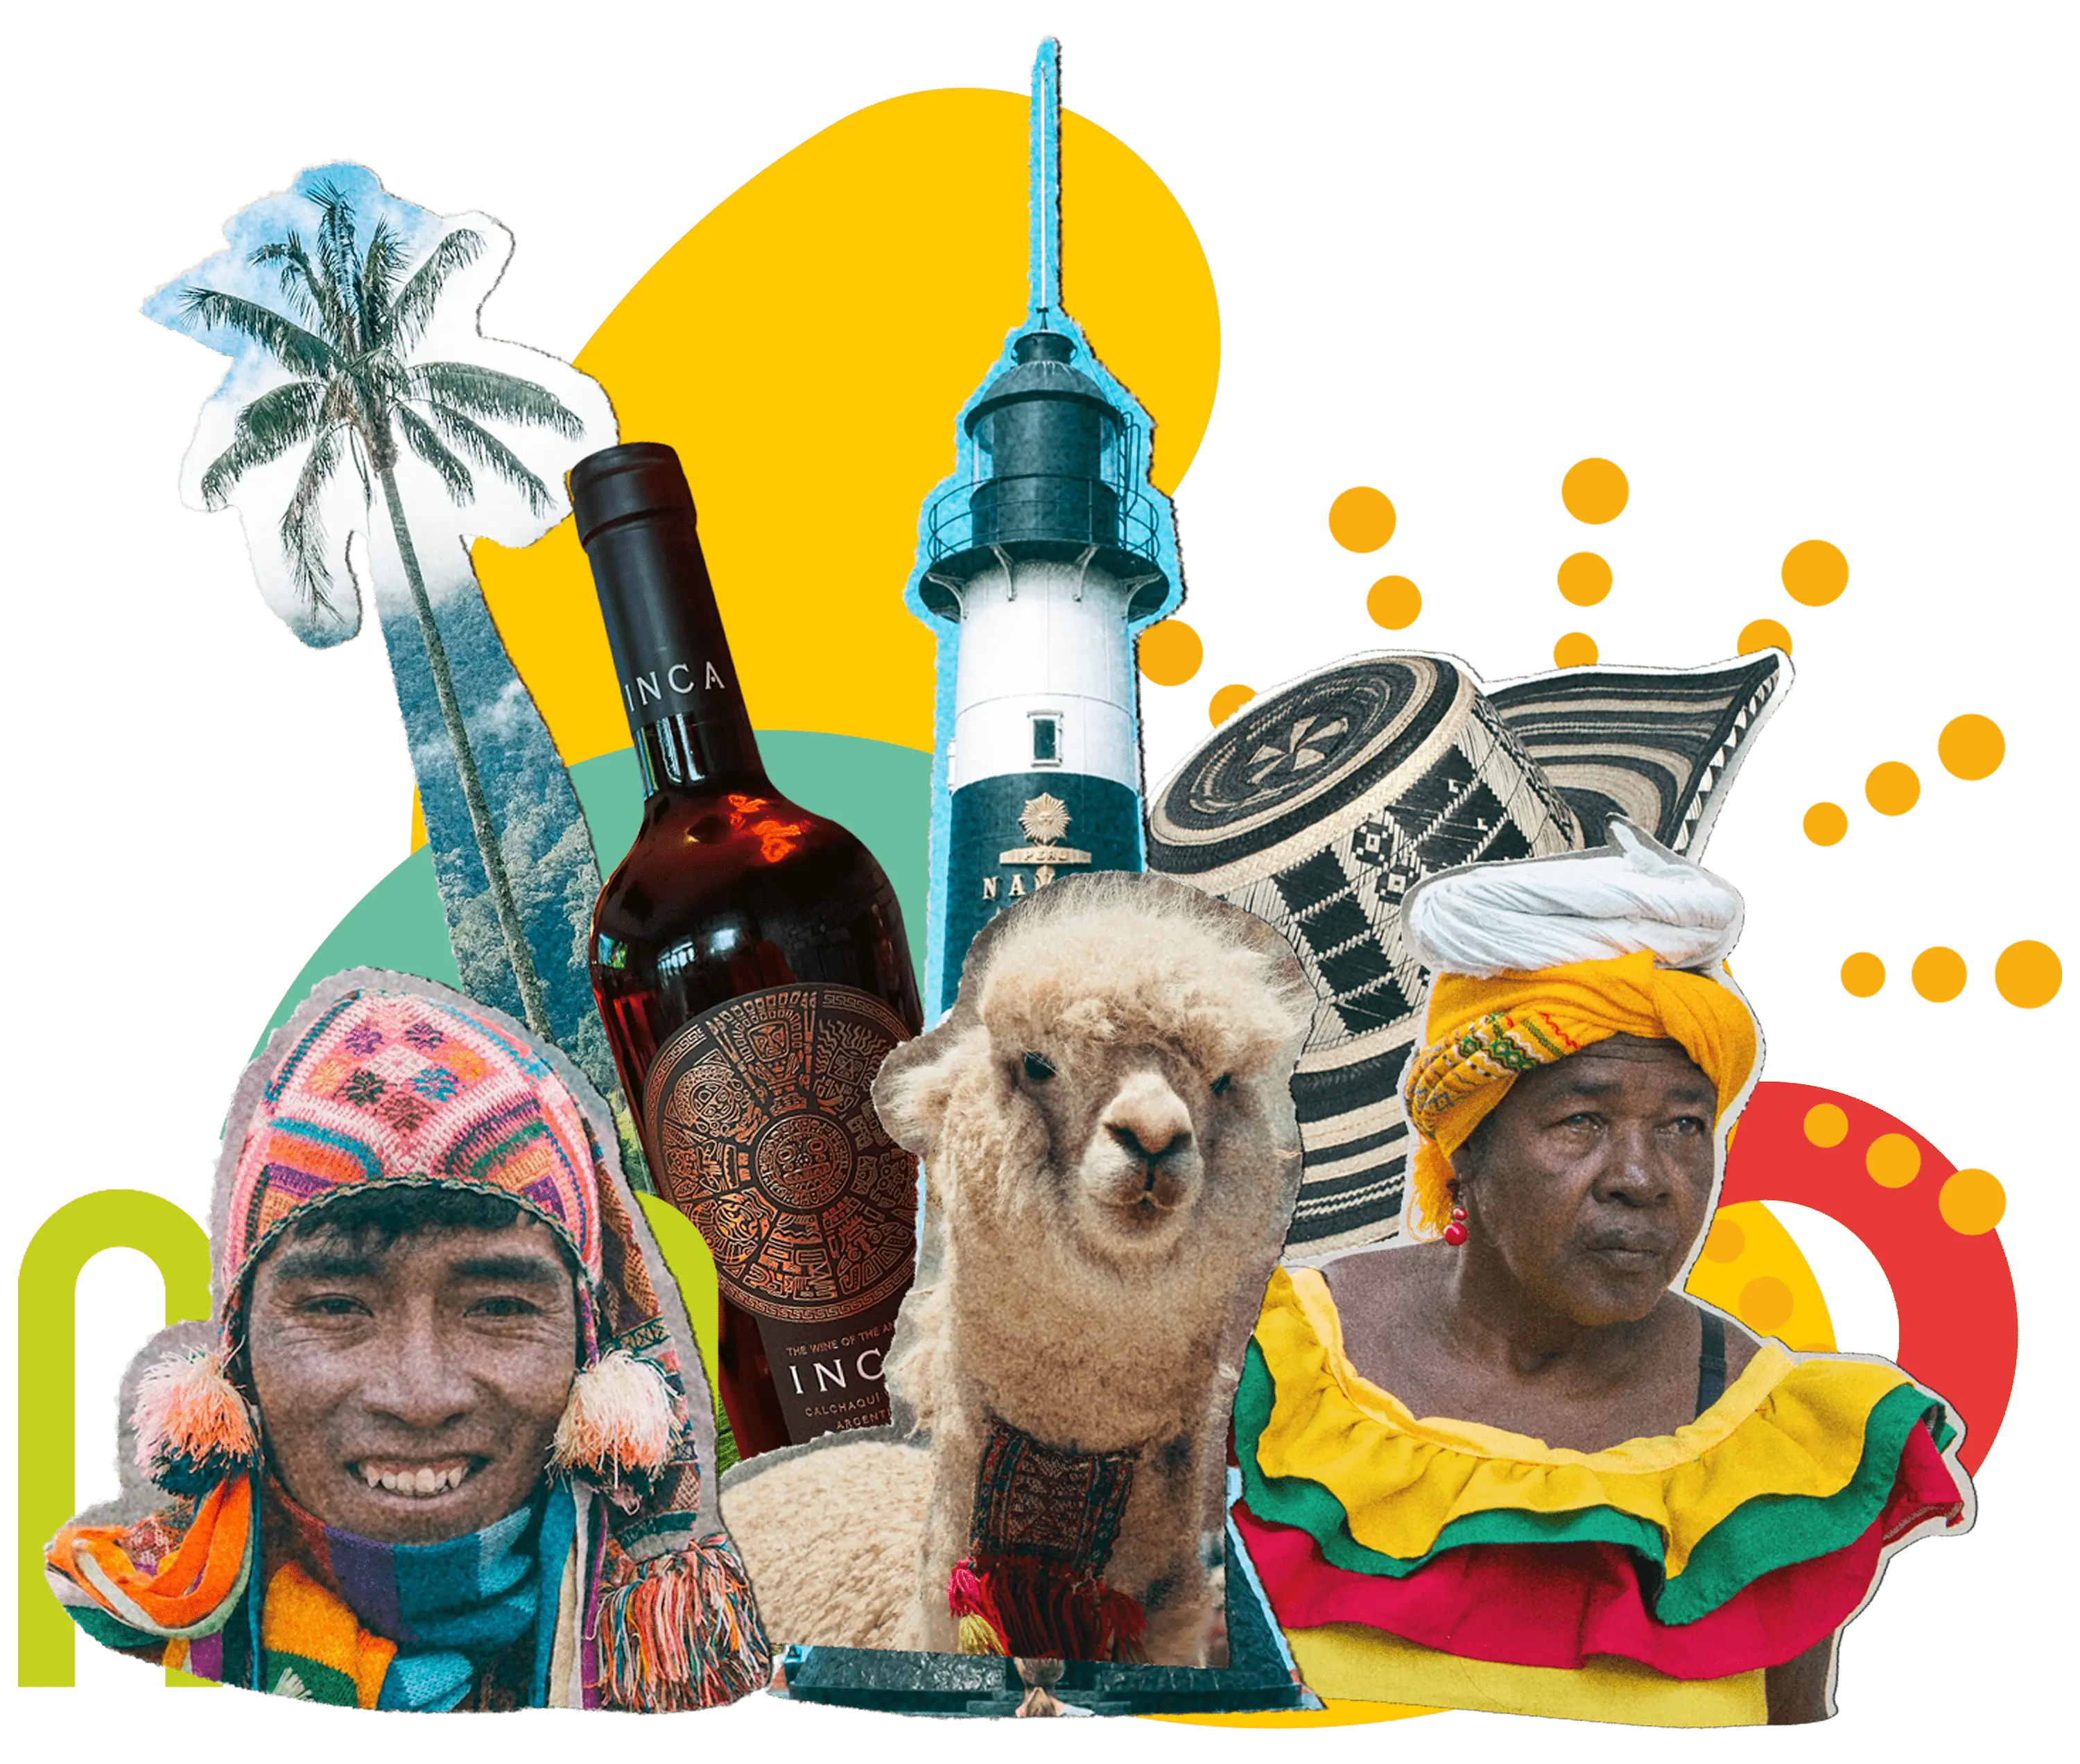 mage of representative elements of Inca culture with a lighthouse, a llama and wine from the inca paisa restaurant